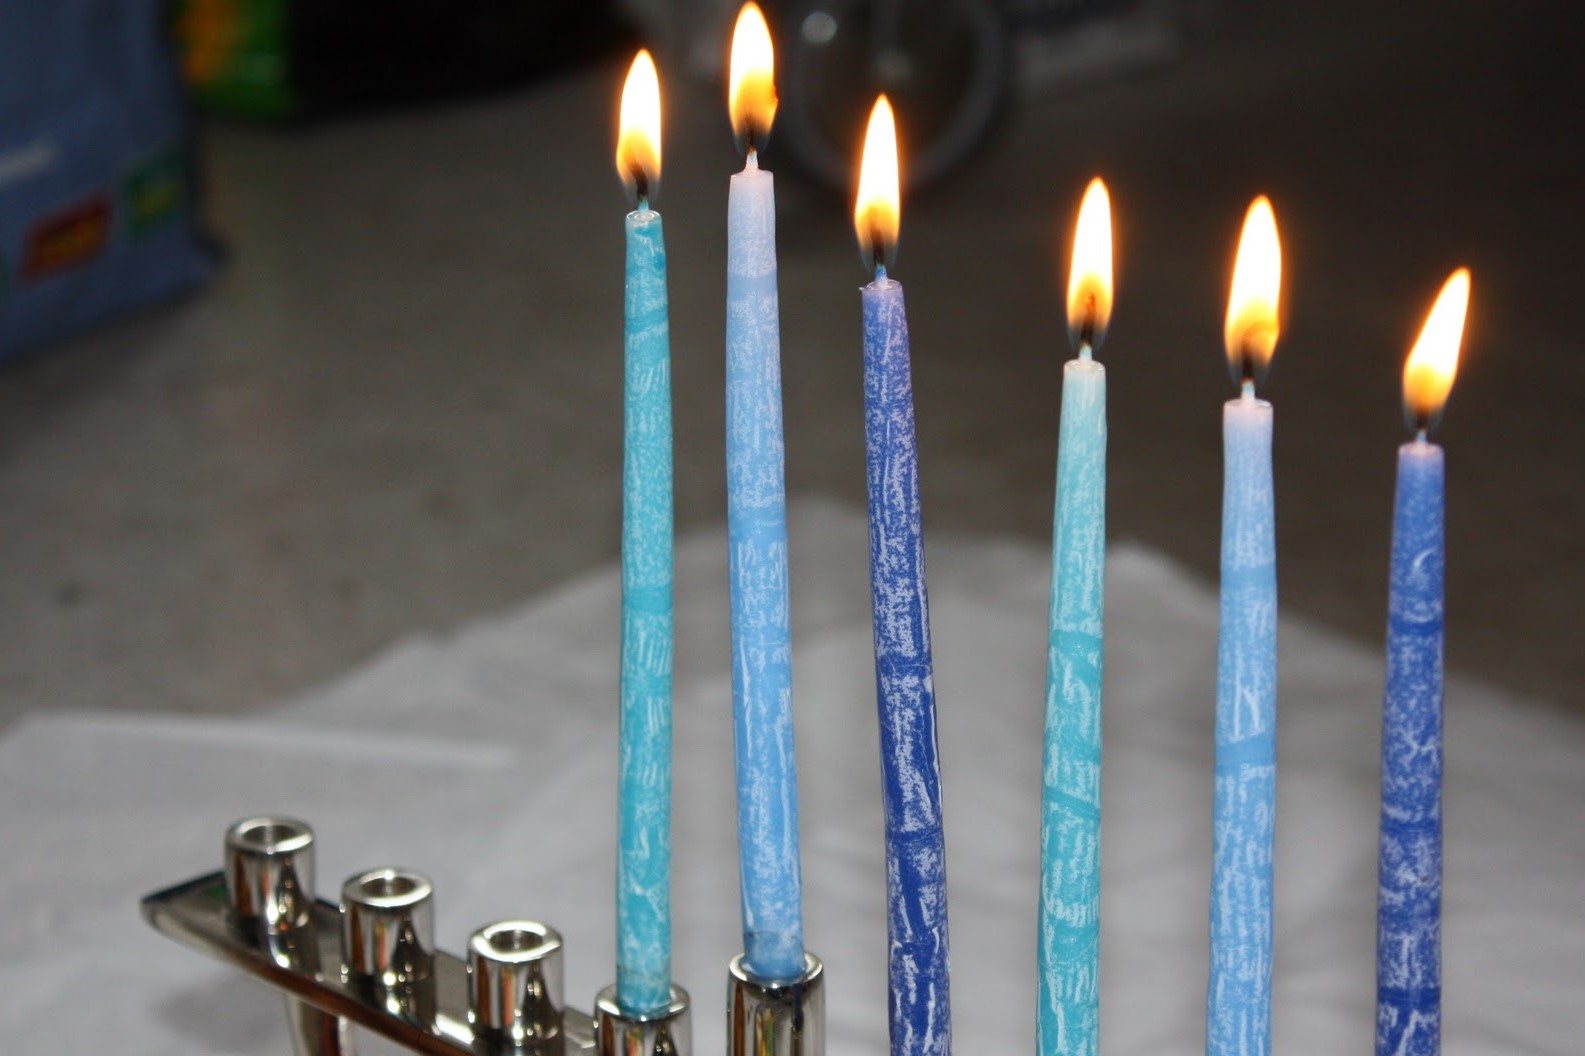 The Fifth Ner of Chanukah: The Greatest Light of Gratitude